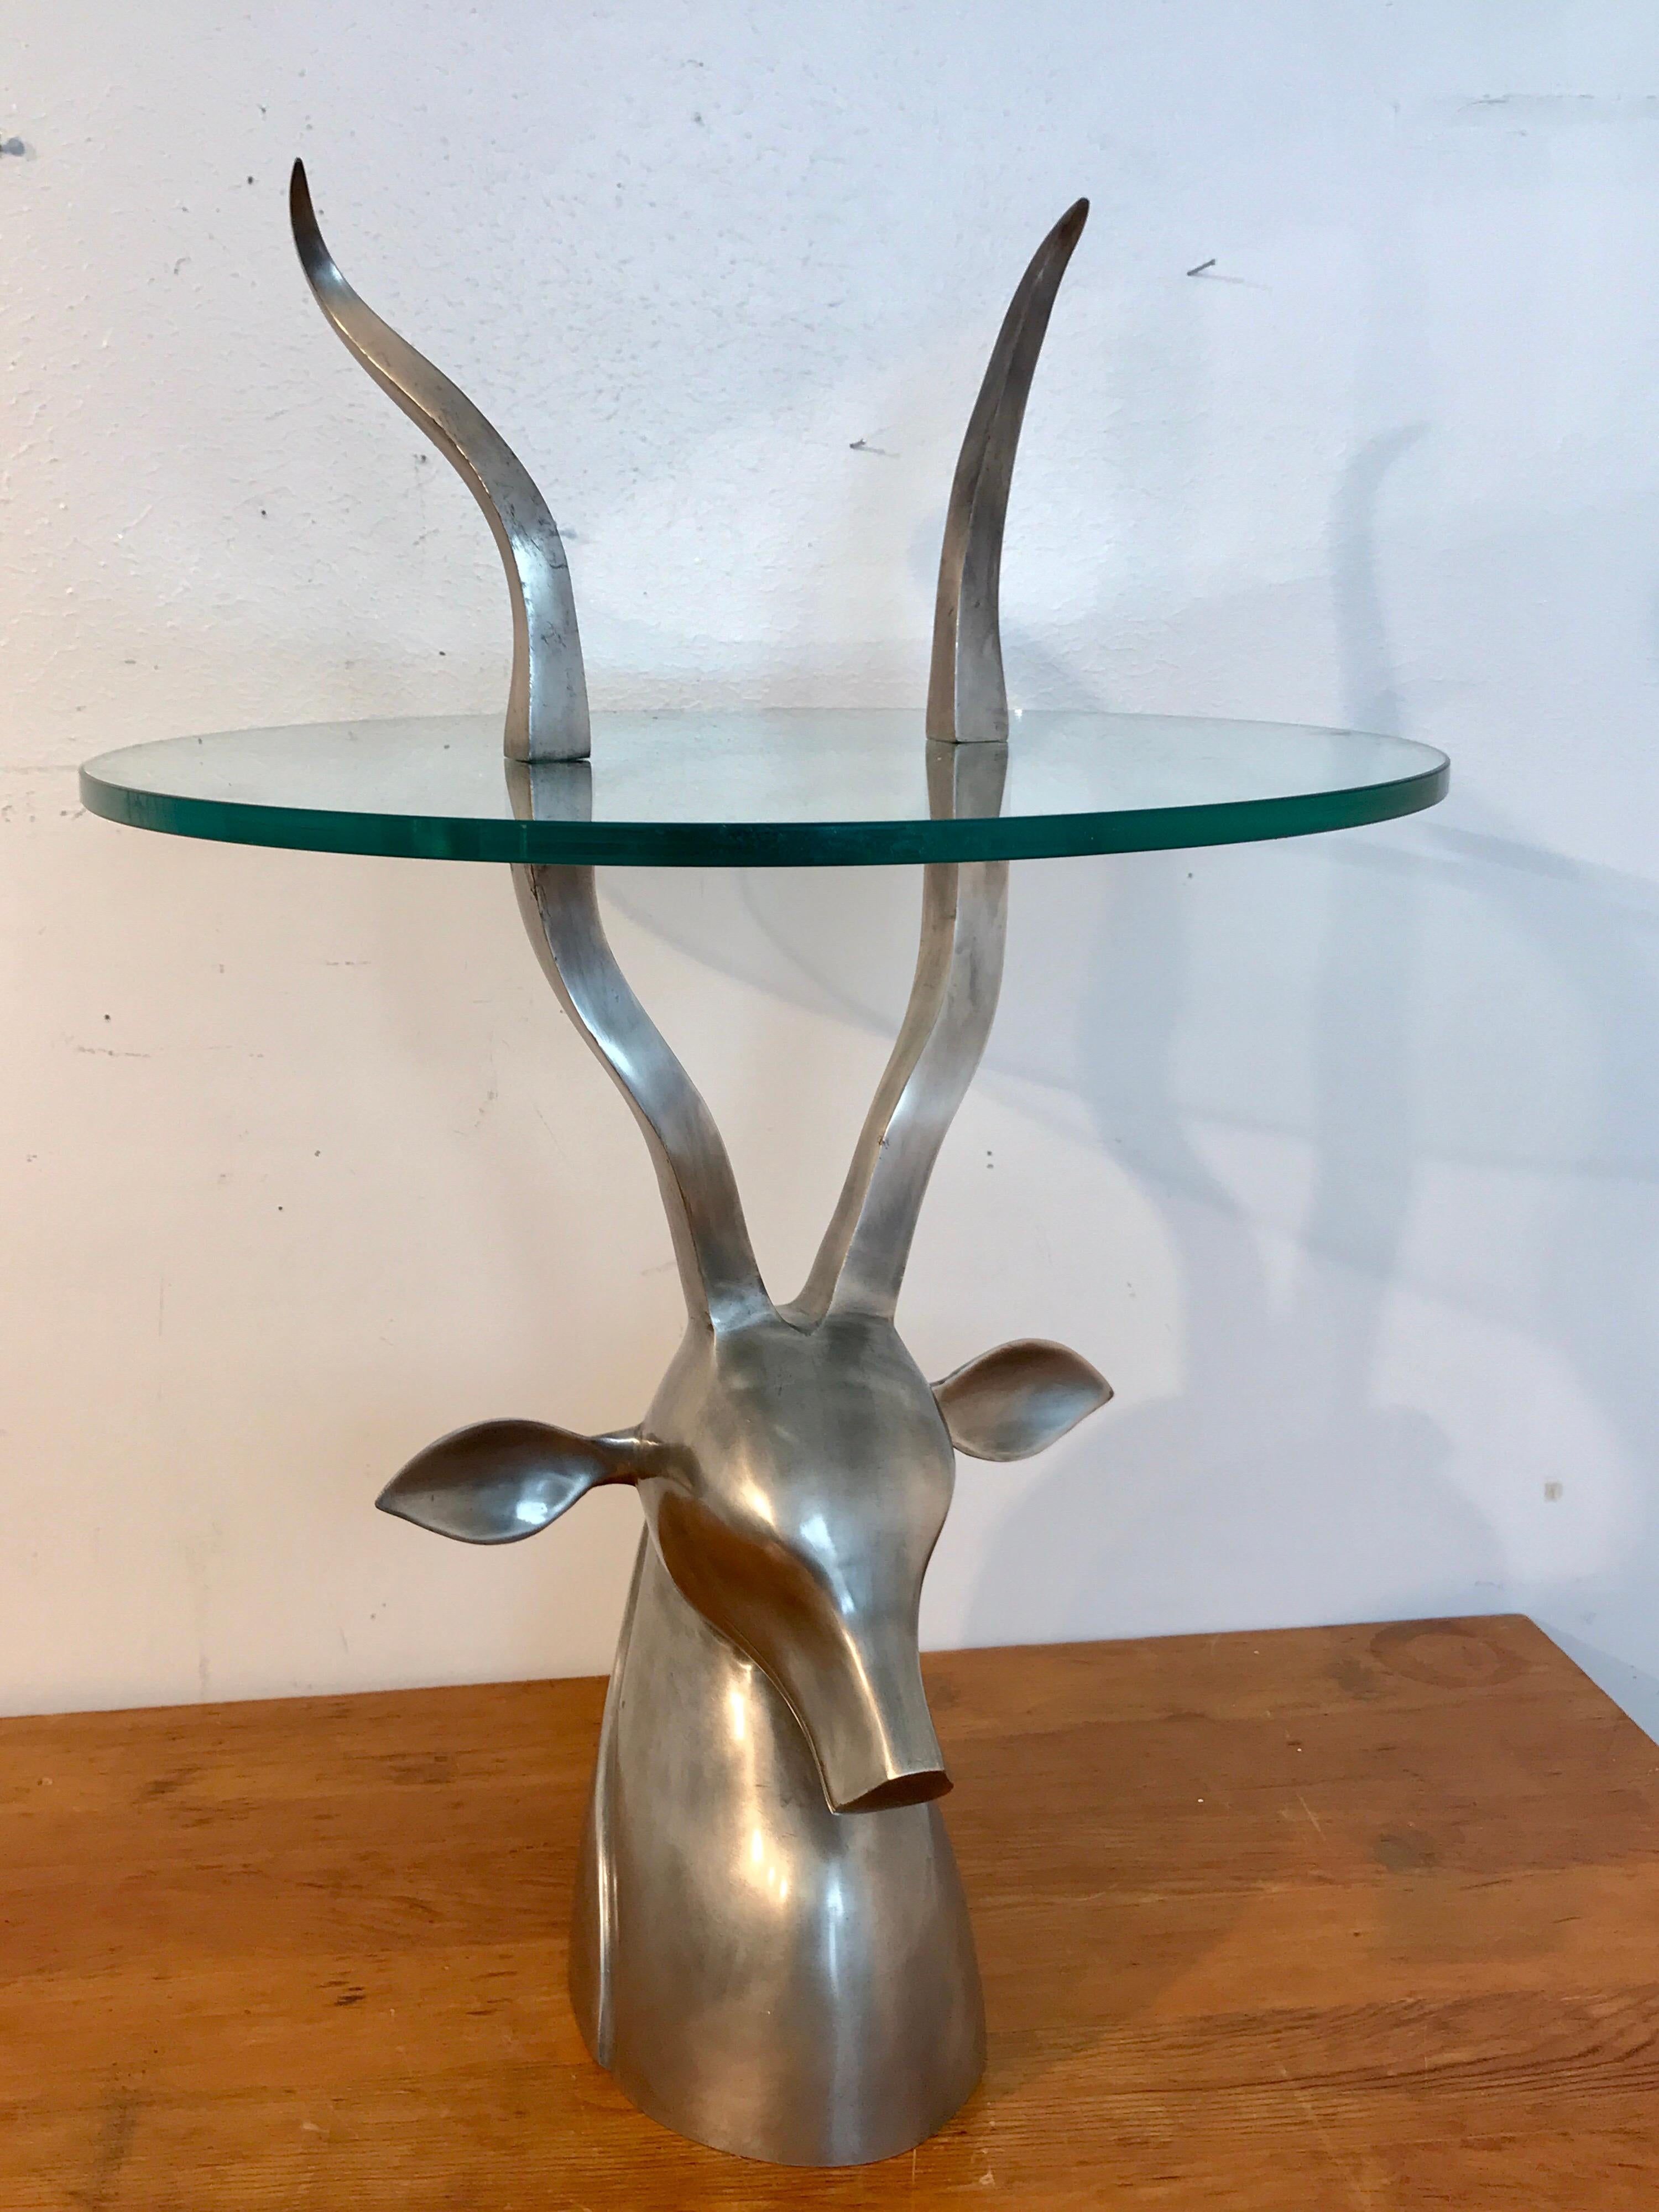 1970s sculptural Ibex drinks table, attributed to Arthur Court, with protruding horns through the 20 inch circular glass top. The total height to the tips of the horns is 30.5